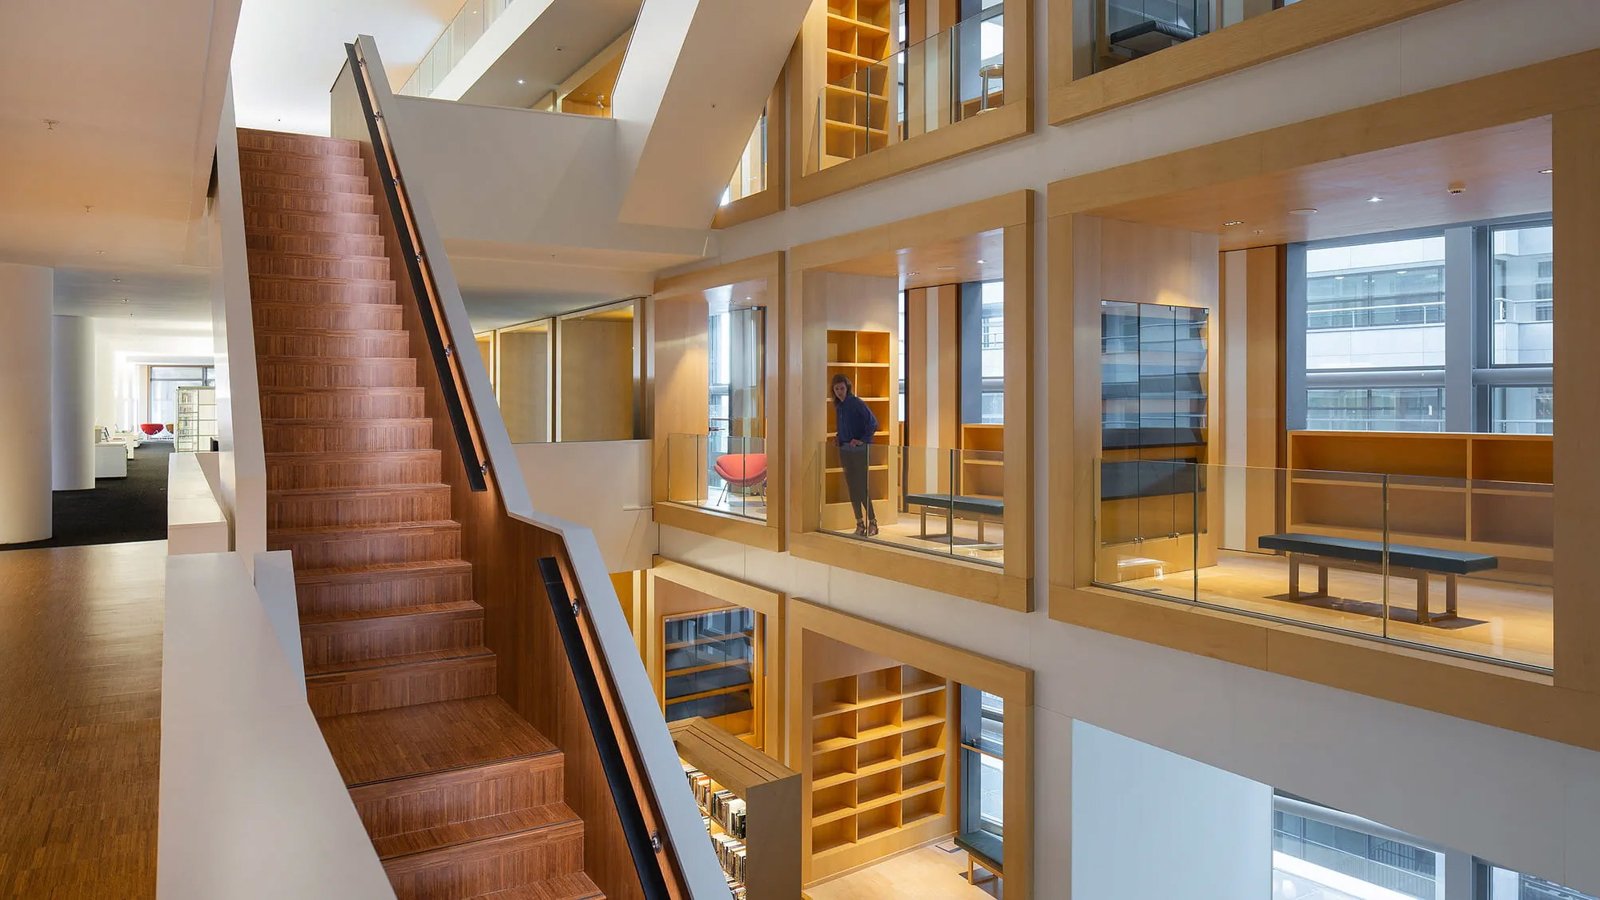 Stairwell in Amsterdam Public Library